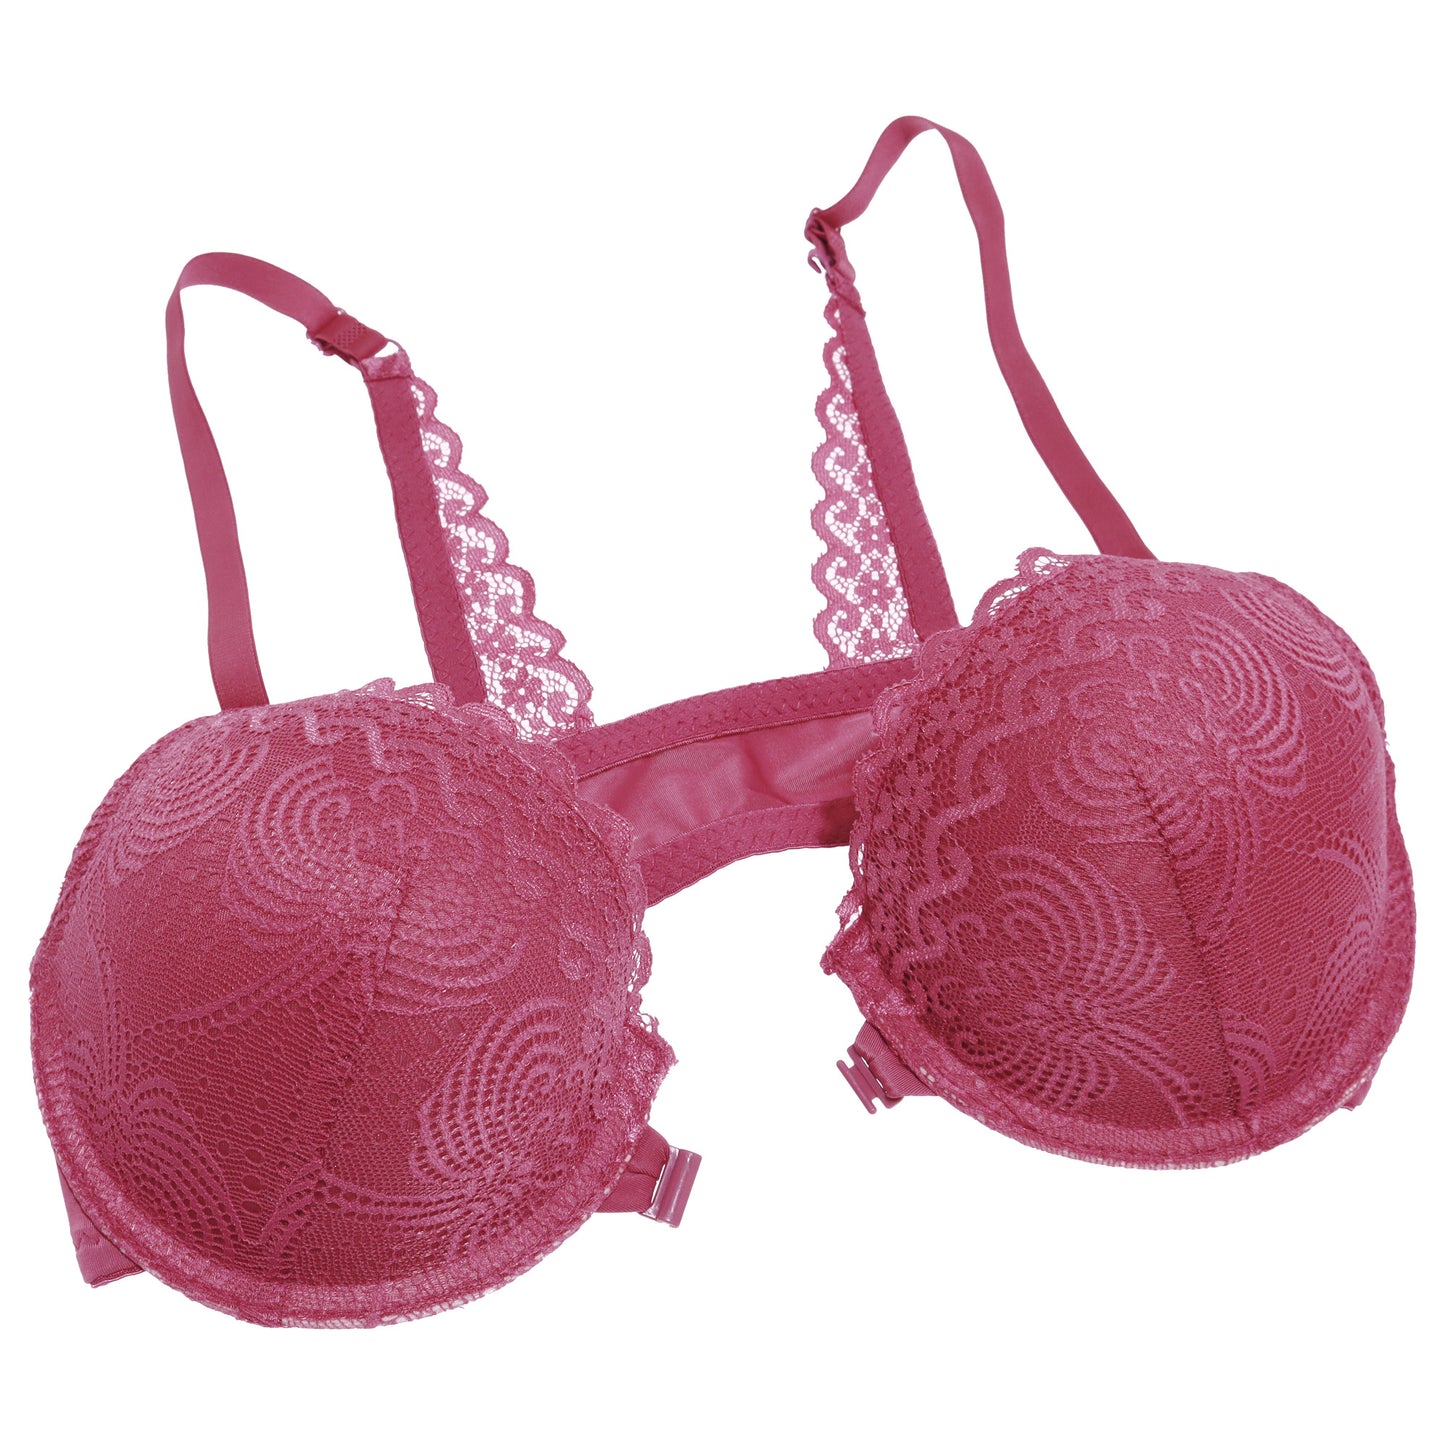 Angelina Wired Racerback Bra With Clasp (6-Pack), #B386